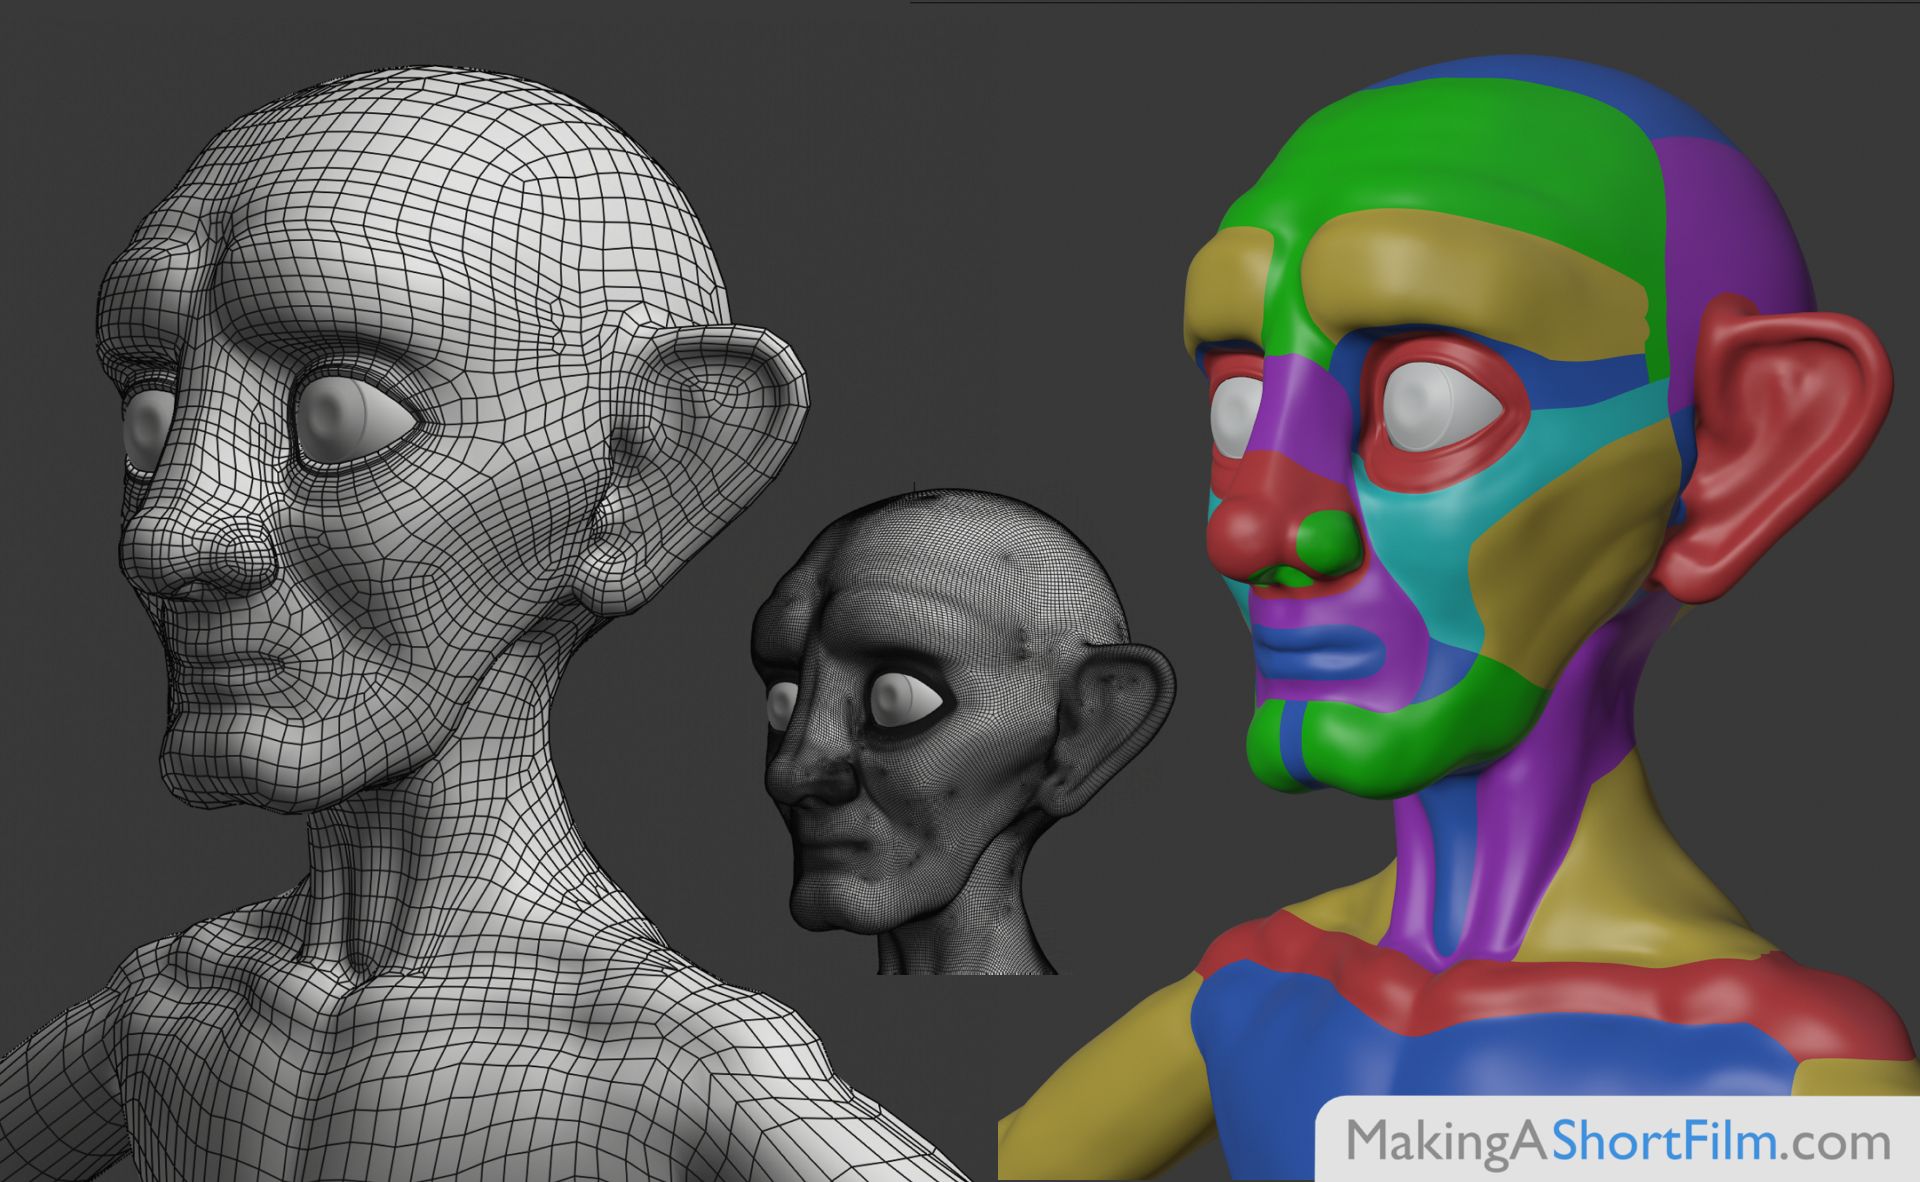 The retopology of the Old Man